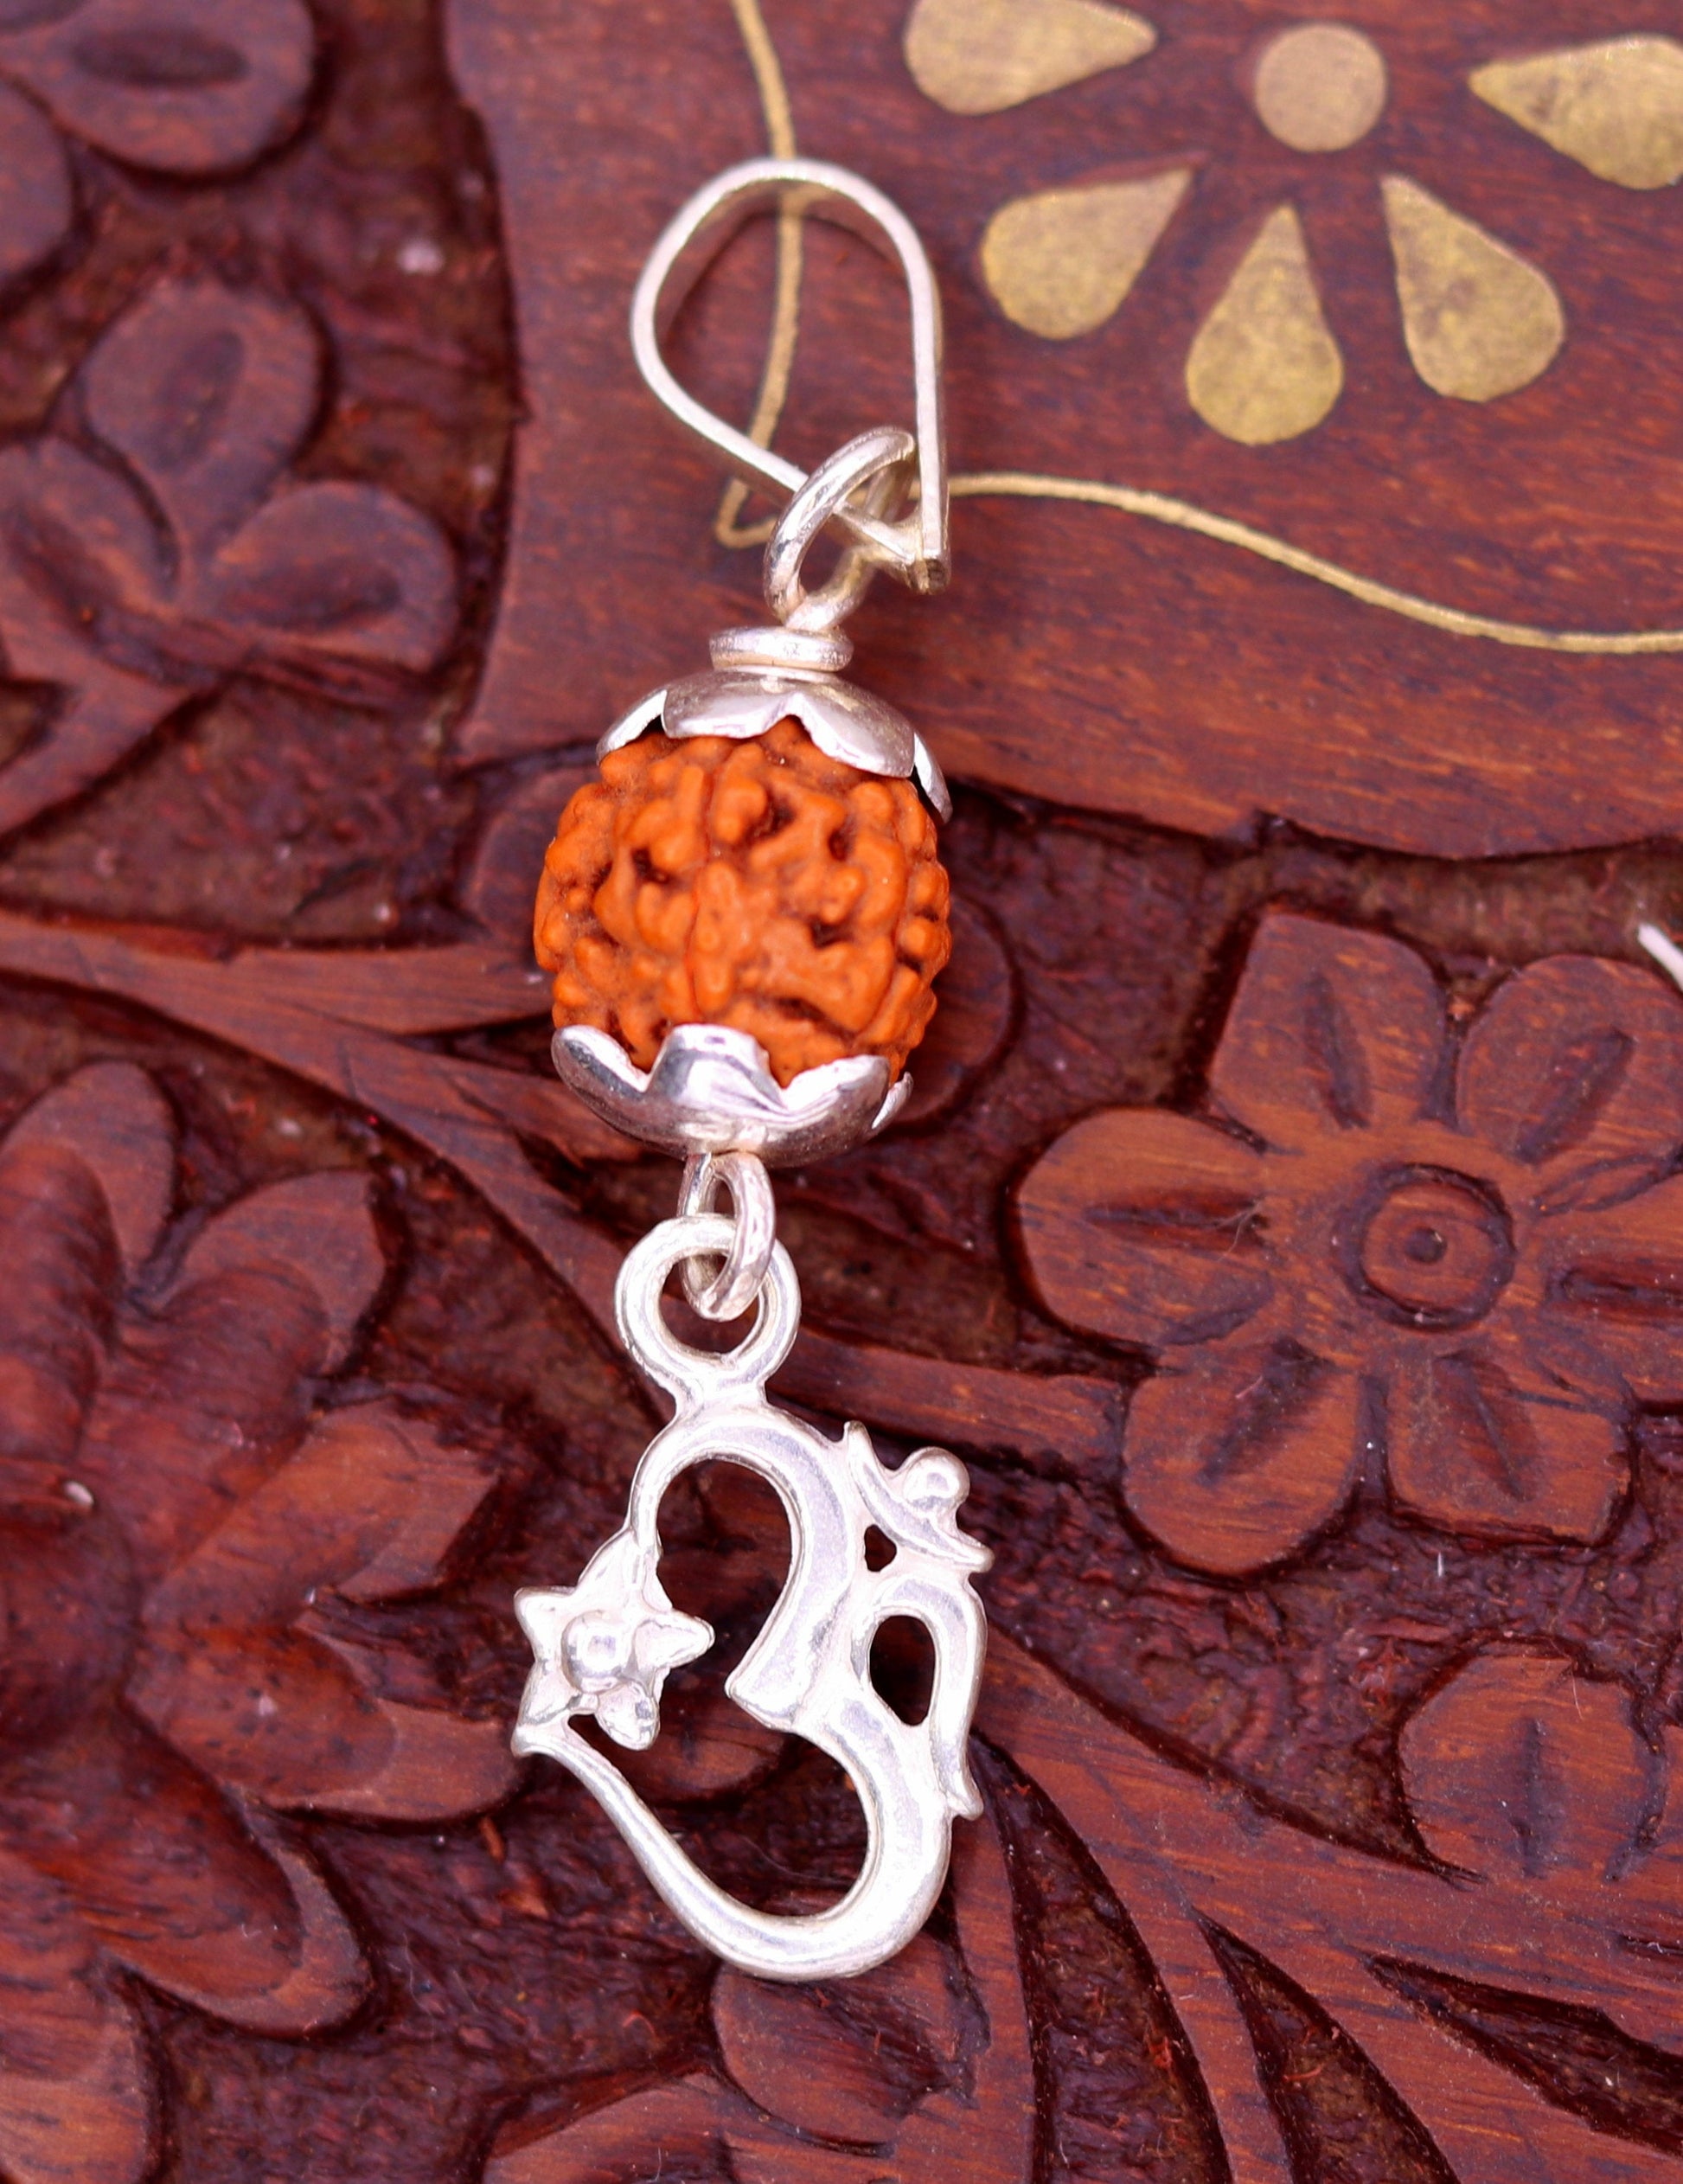 vintage design Sterling silver Aum mantra pendant with Natural rudraksha beads excellent unisex gifting light weight jewelry nsp281 - TRIBAL ORNAMENTS